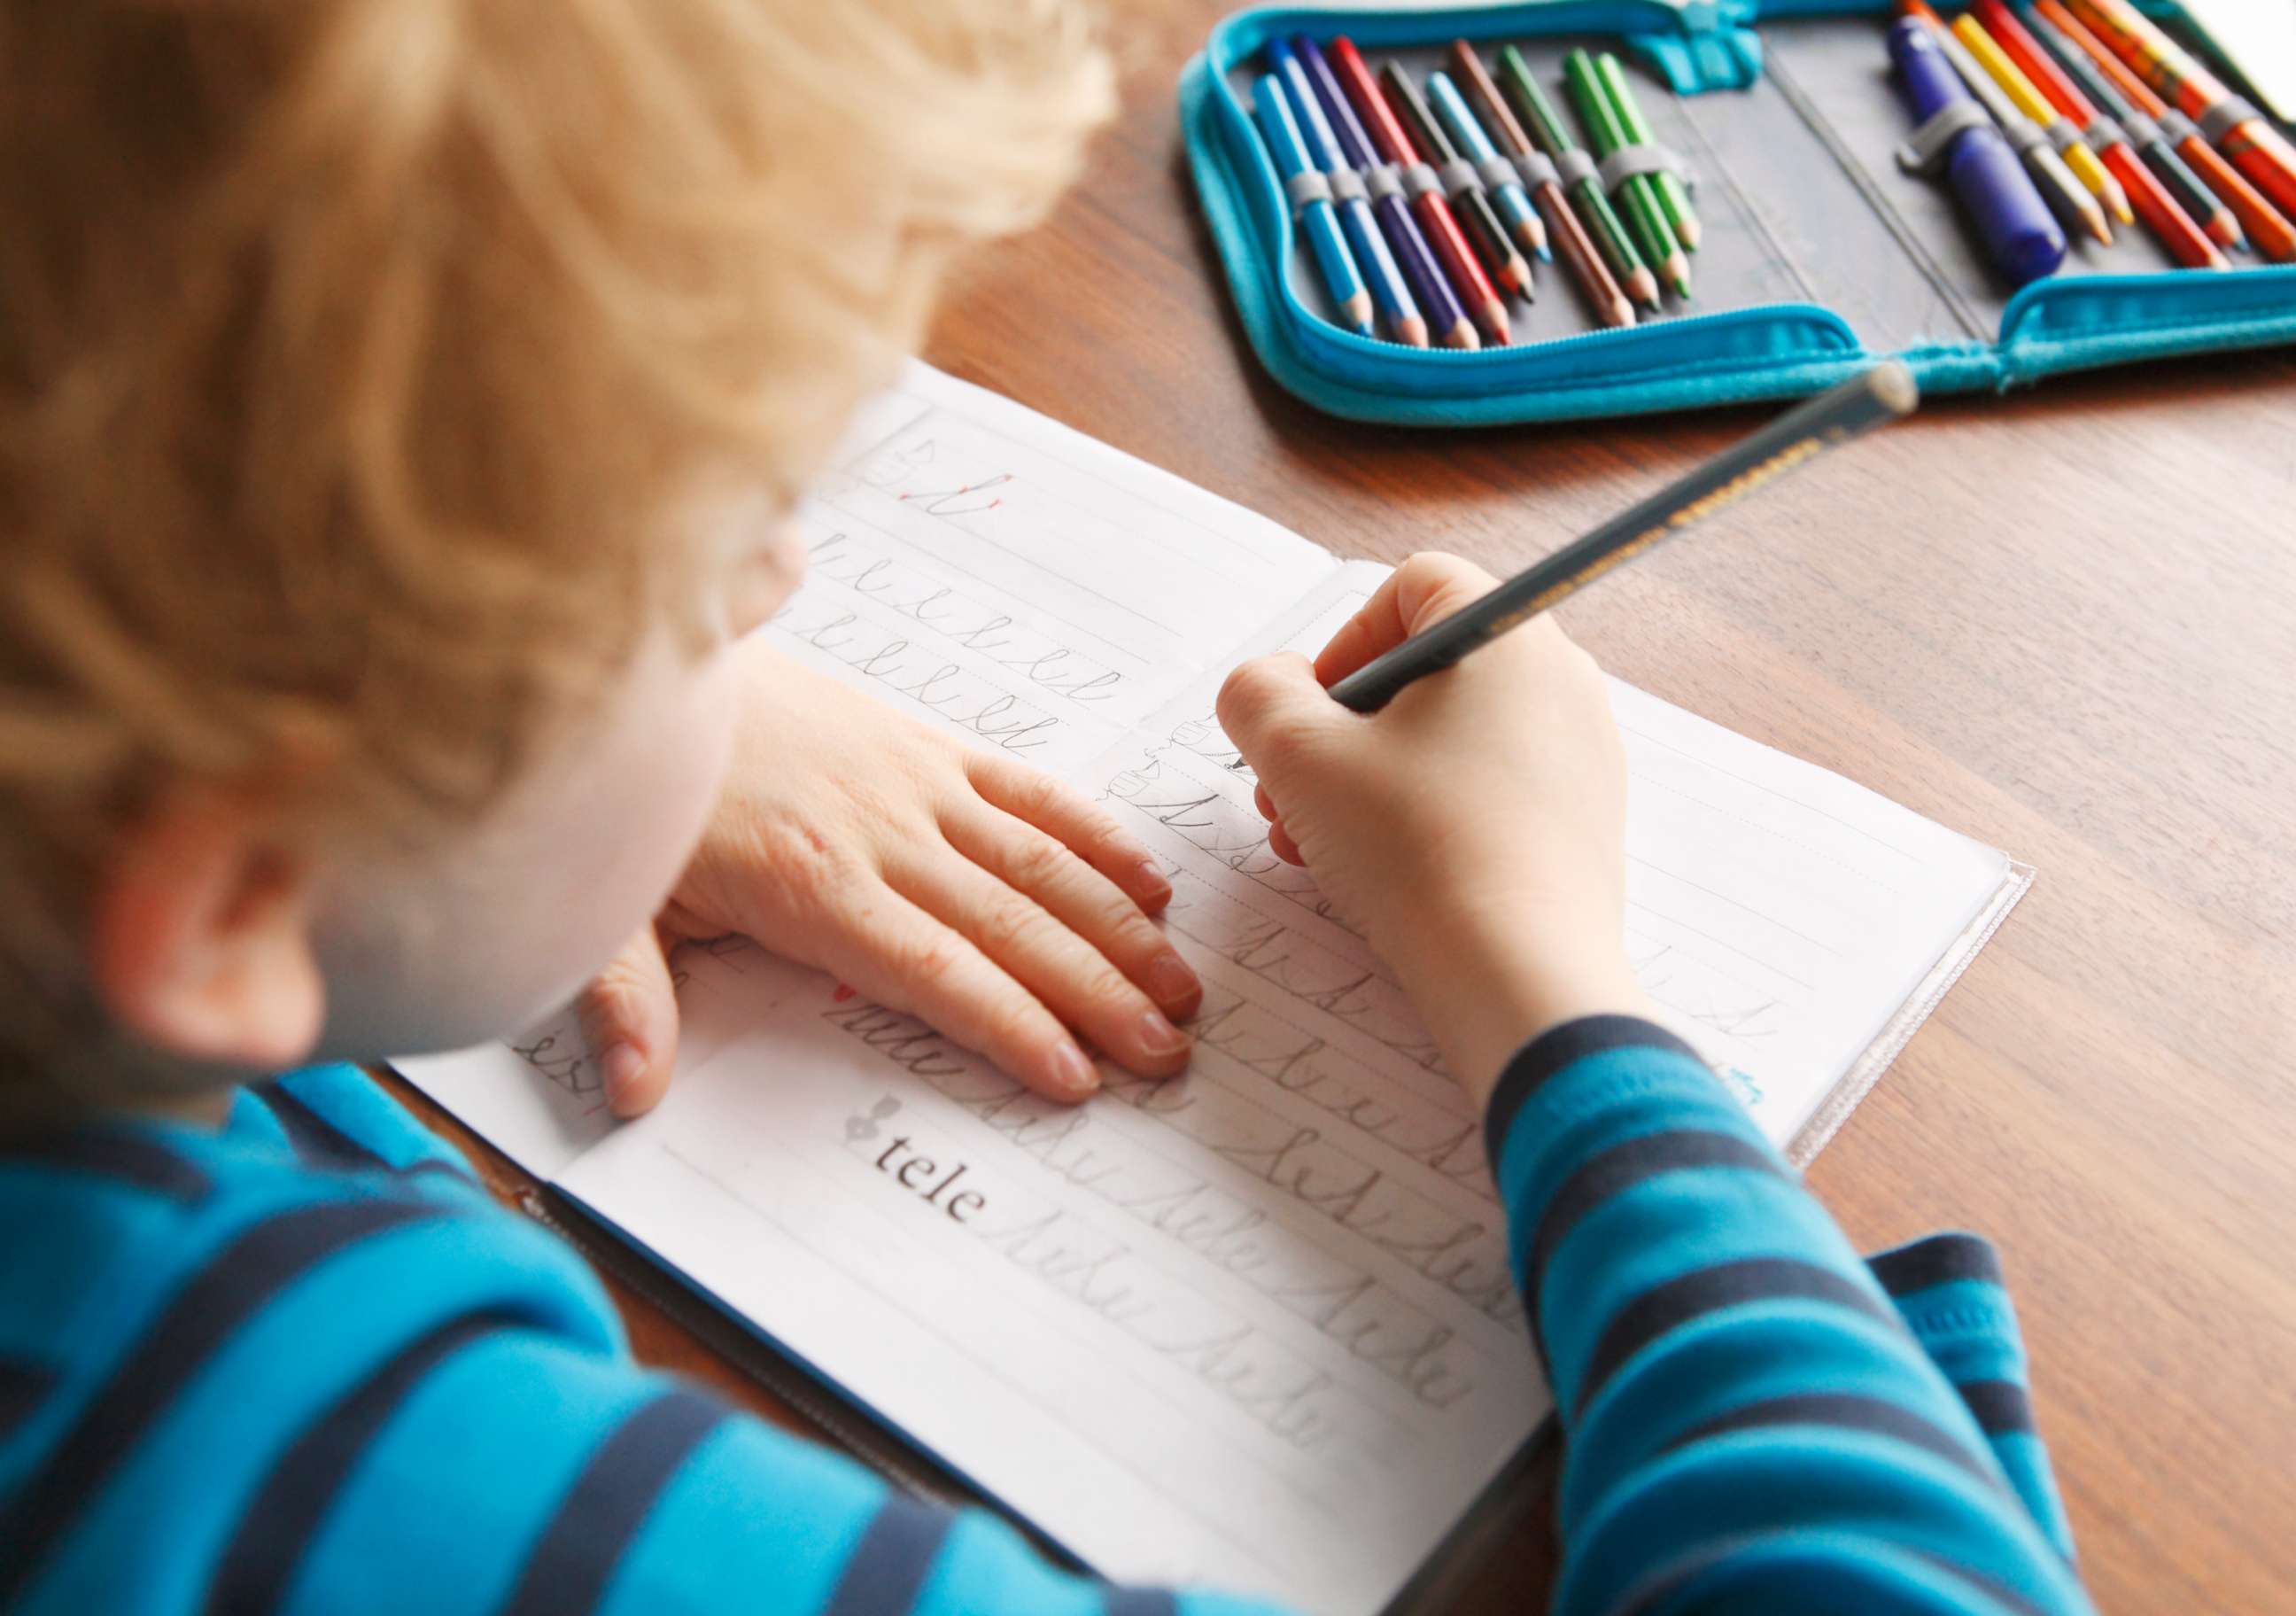 PHOTO: A boy appears to learn to write in cursive in this stock photo.